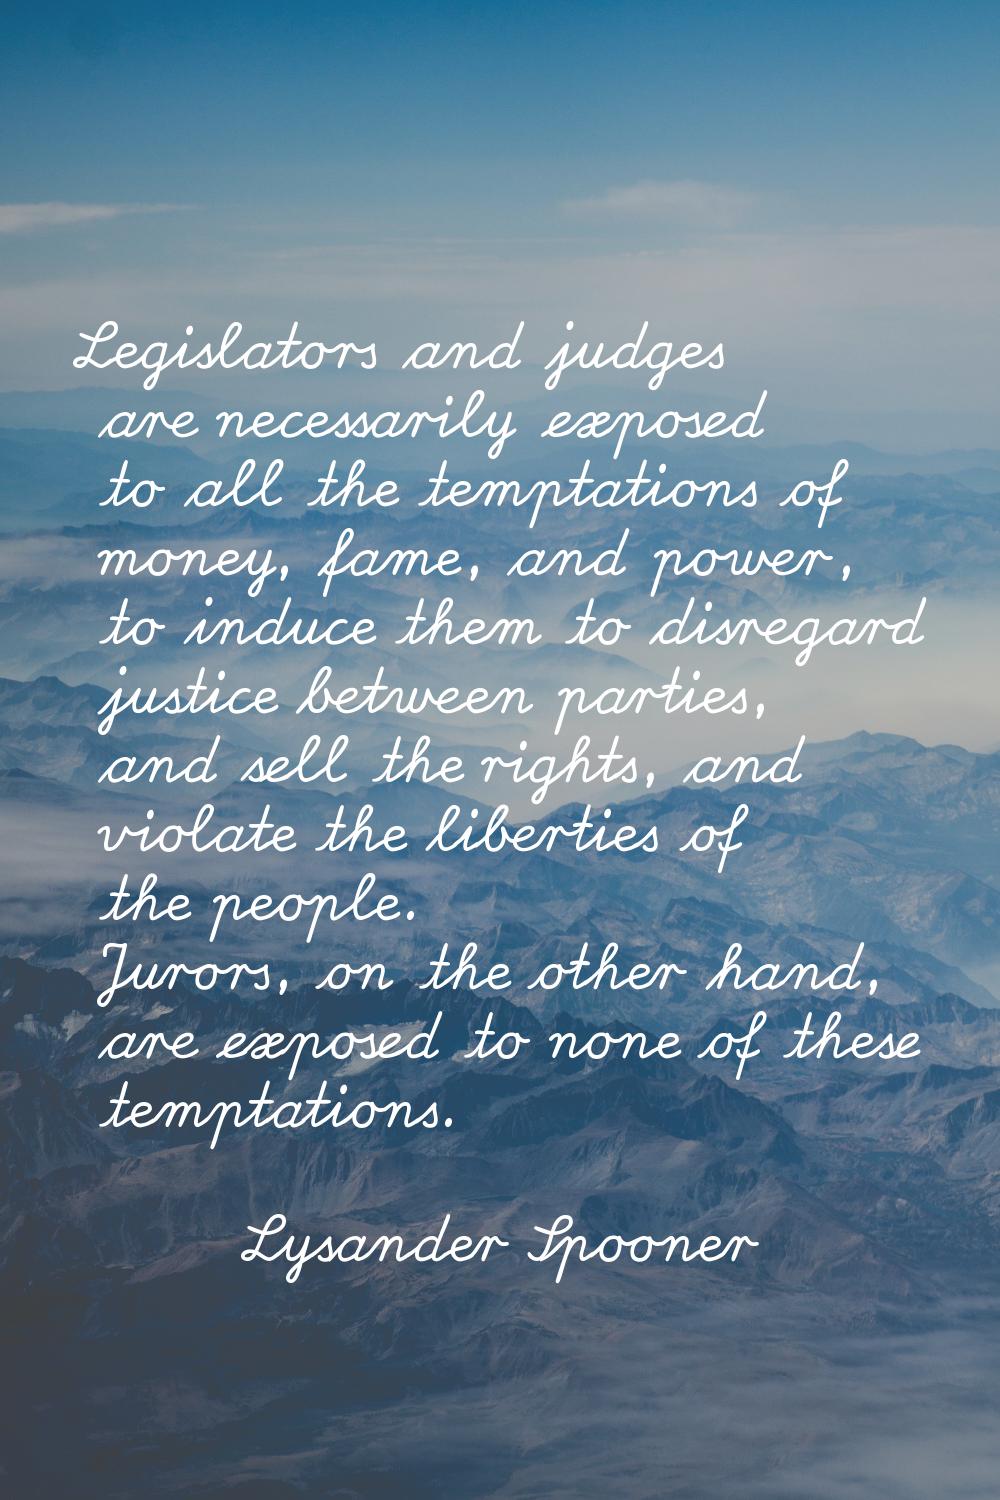 Legislators and judges are necessarily exposed to all the temptations of money, fame, and power, to